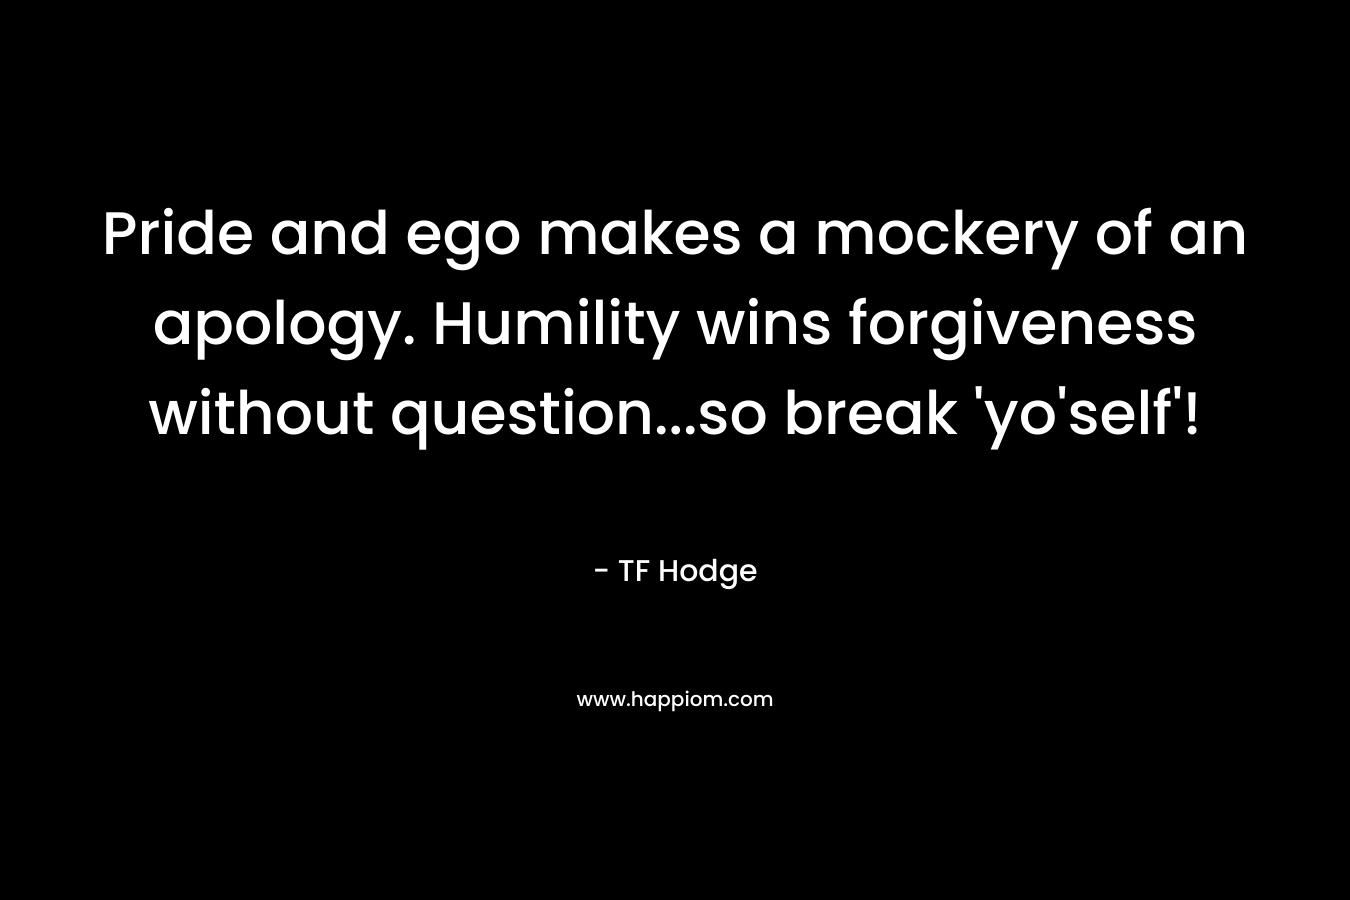 Pride and ego makes a mockery of an apology. Humility wins forgiveness without question...so break 'yo'self'!